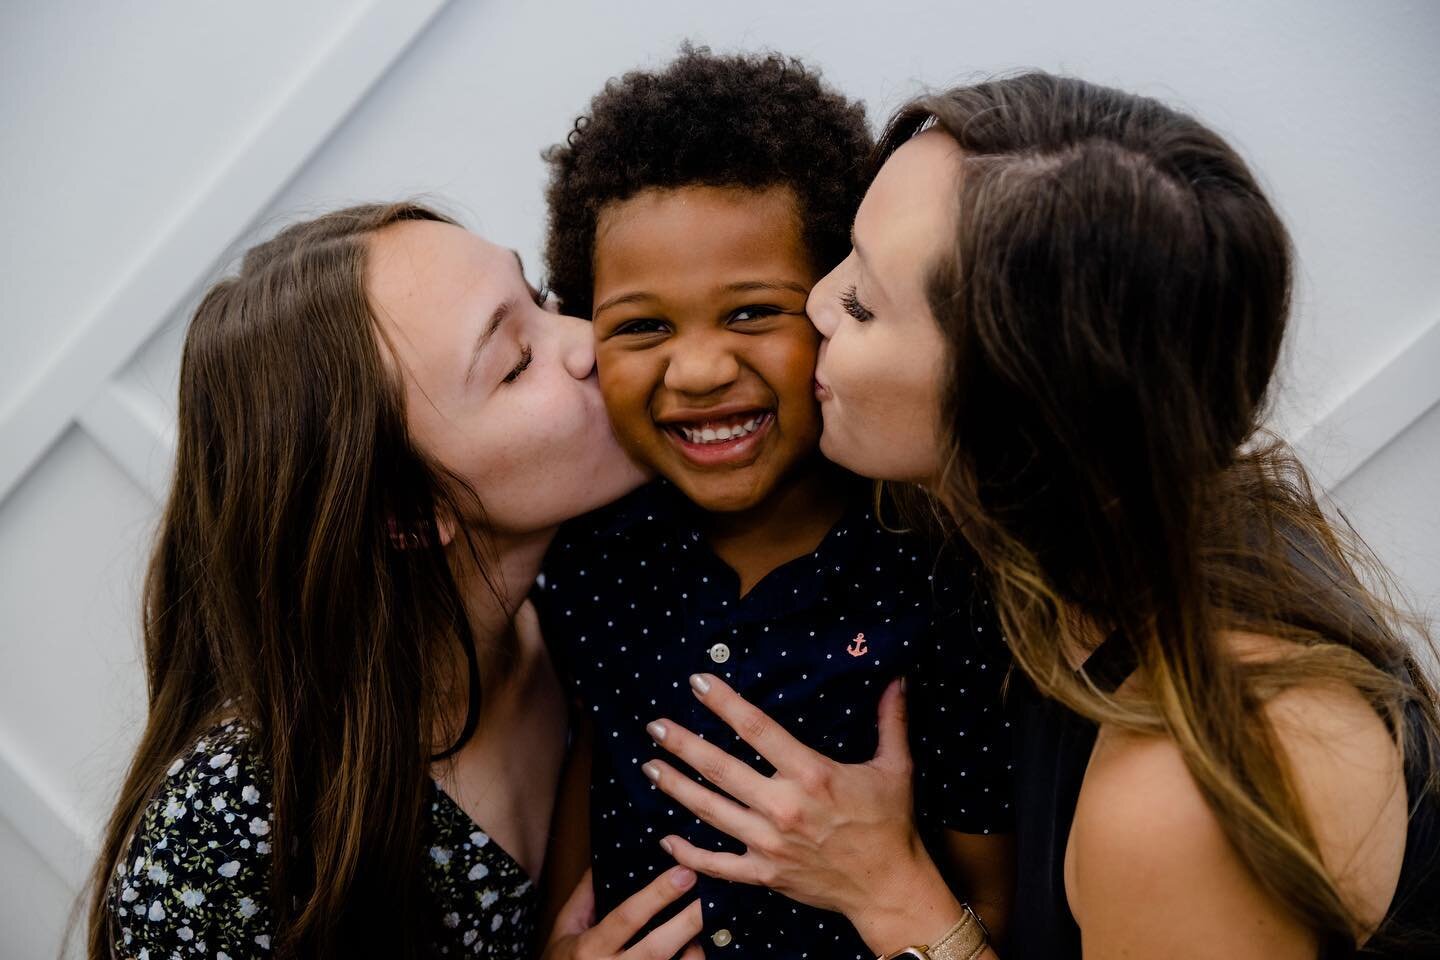 Sneak peek: Julie and I were so blessed to be invited to this sweet boy&rsquo;s adoption day 🥰.

His wonderful family, friends and class were all so excited to love and support him on his special day.

Best quote of the day: His big sister said to h